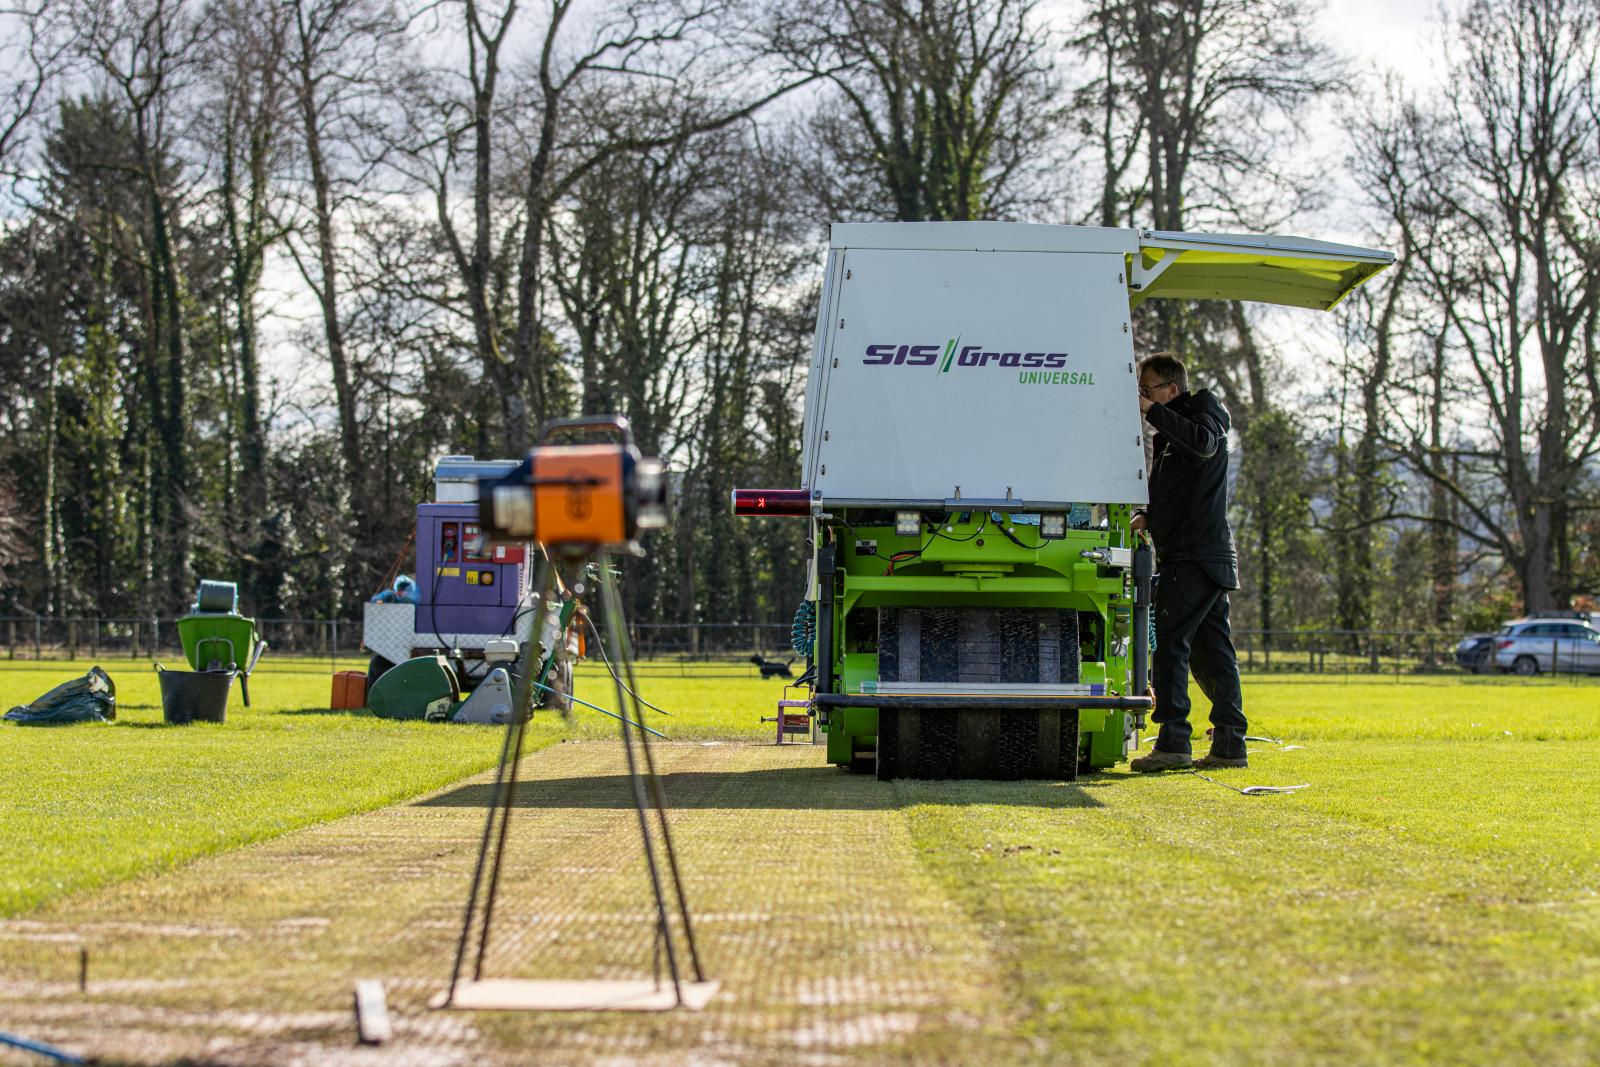 SIS Pitches' machinery installing the first of Heathcoat CC's two hybrid pitches.